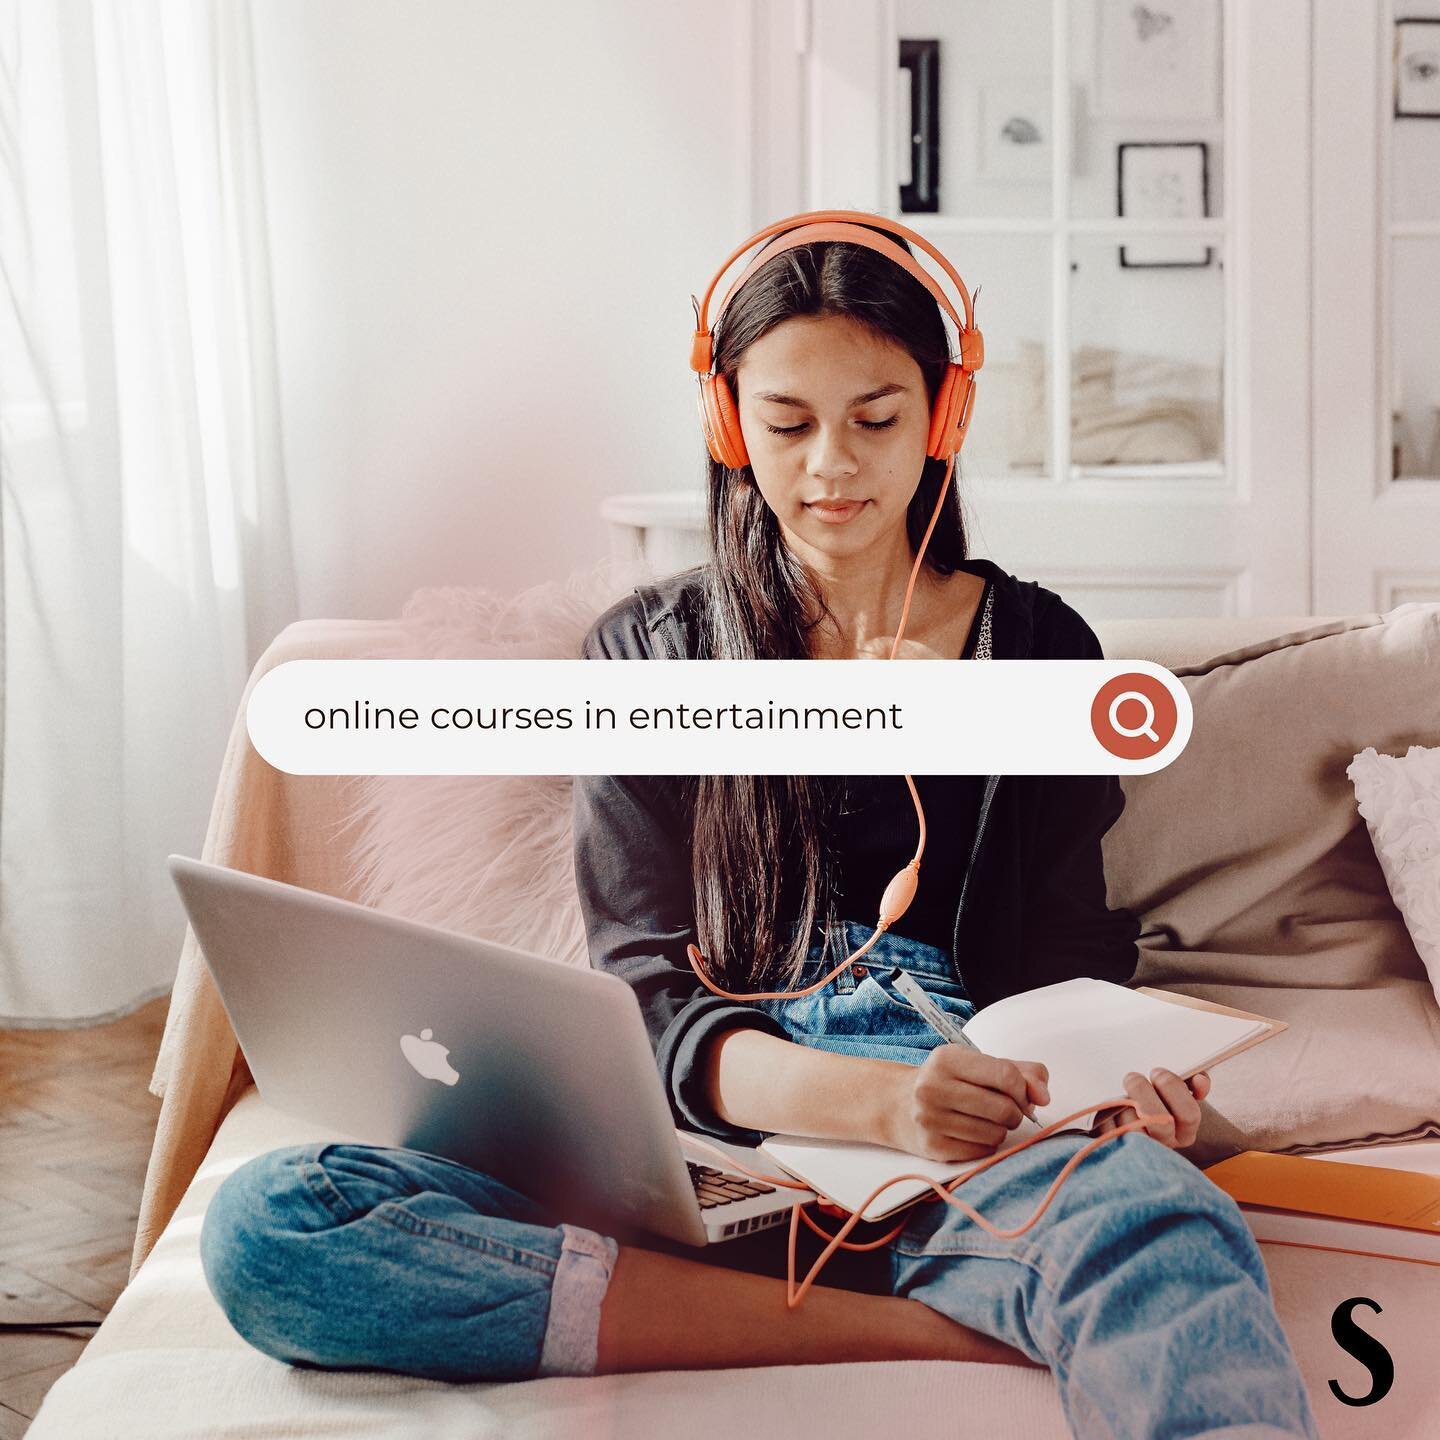 a roundup from us of upcoming, affordable online courses to develop various skill sets in the entertainment industry. Save for later, share with a friend, just don&rsquo;t forget to sign up ;) 💻💡✨ *not sponsored, just our picks!